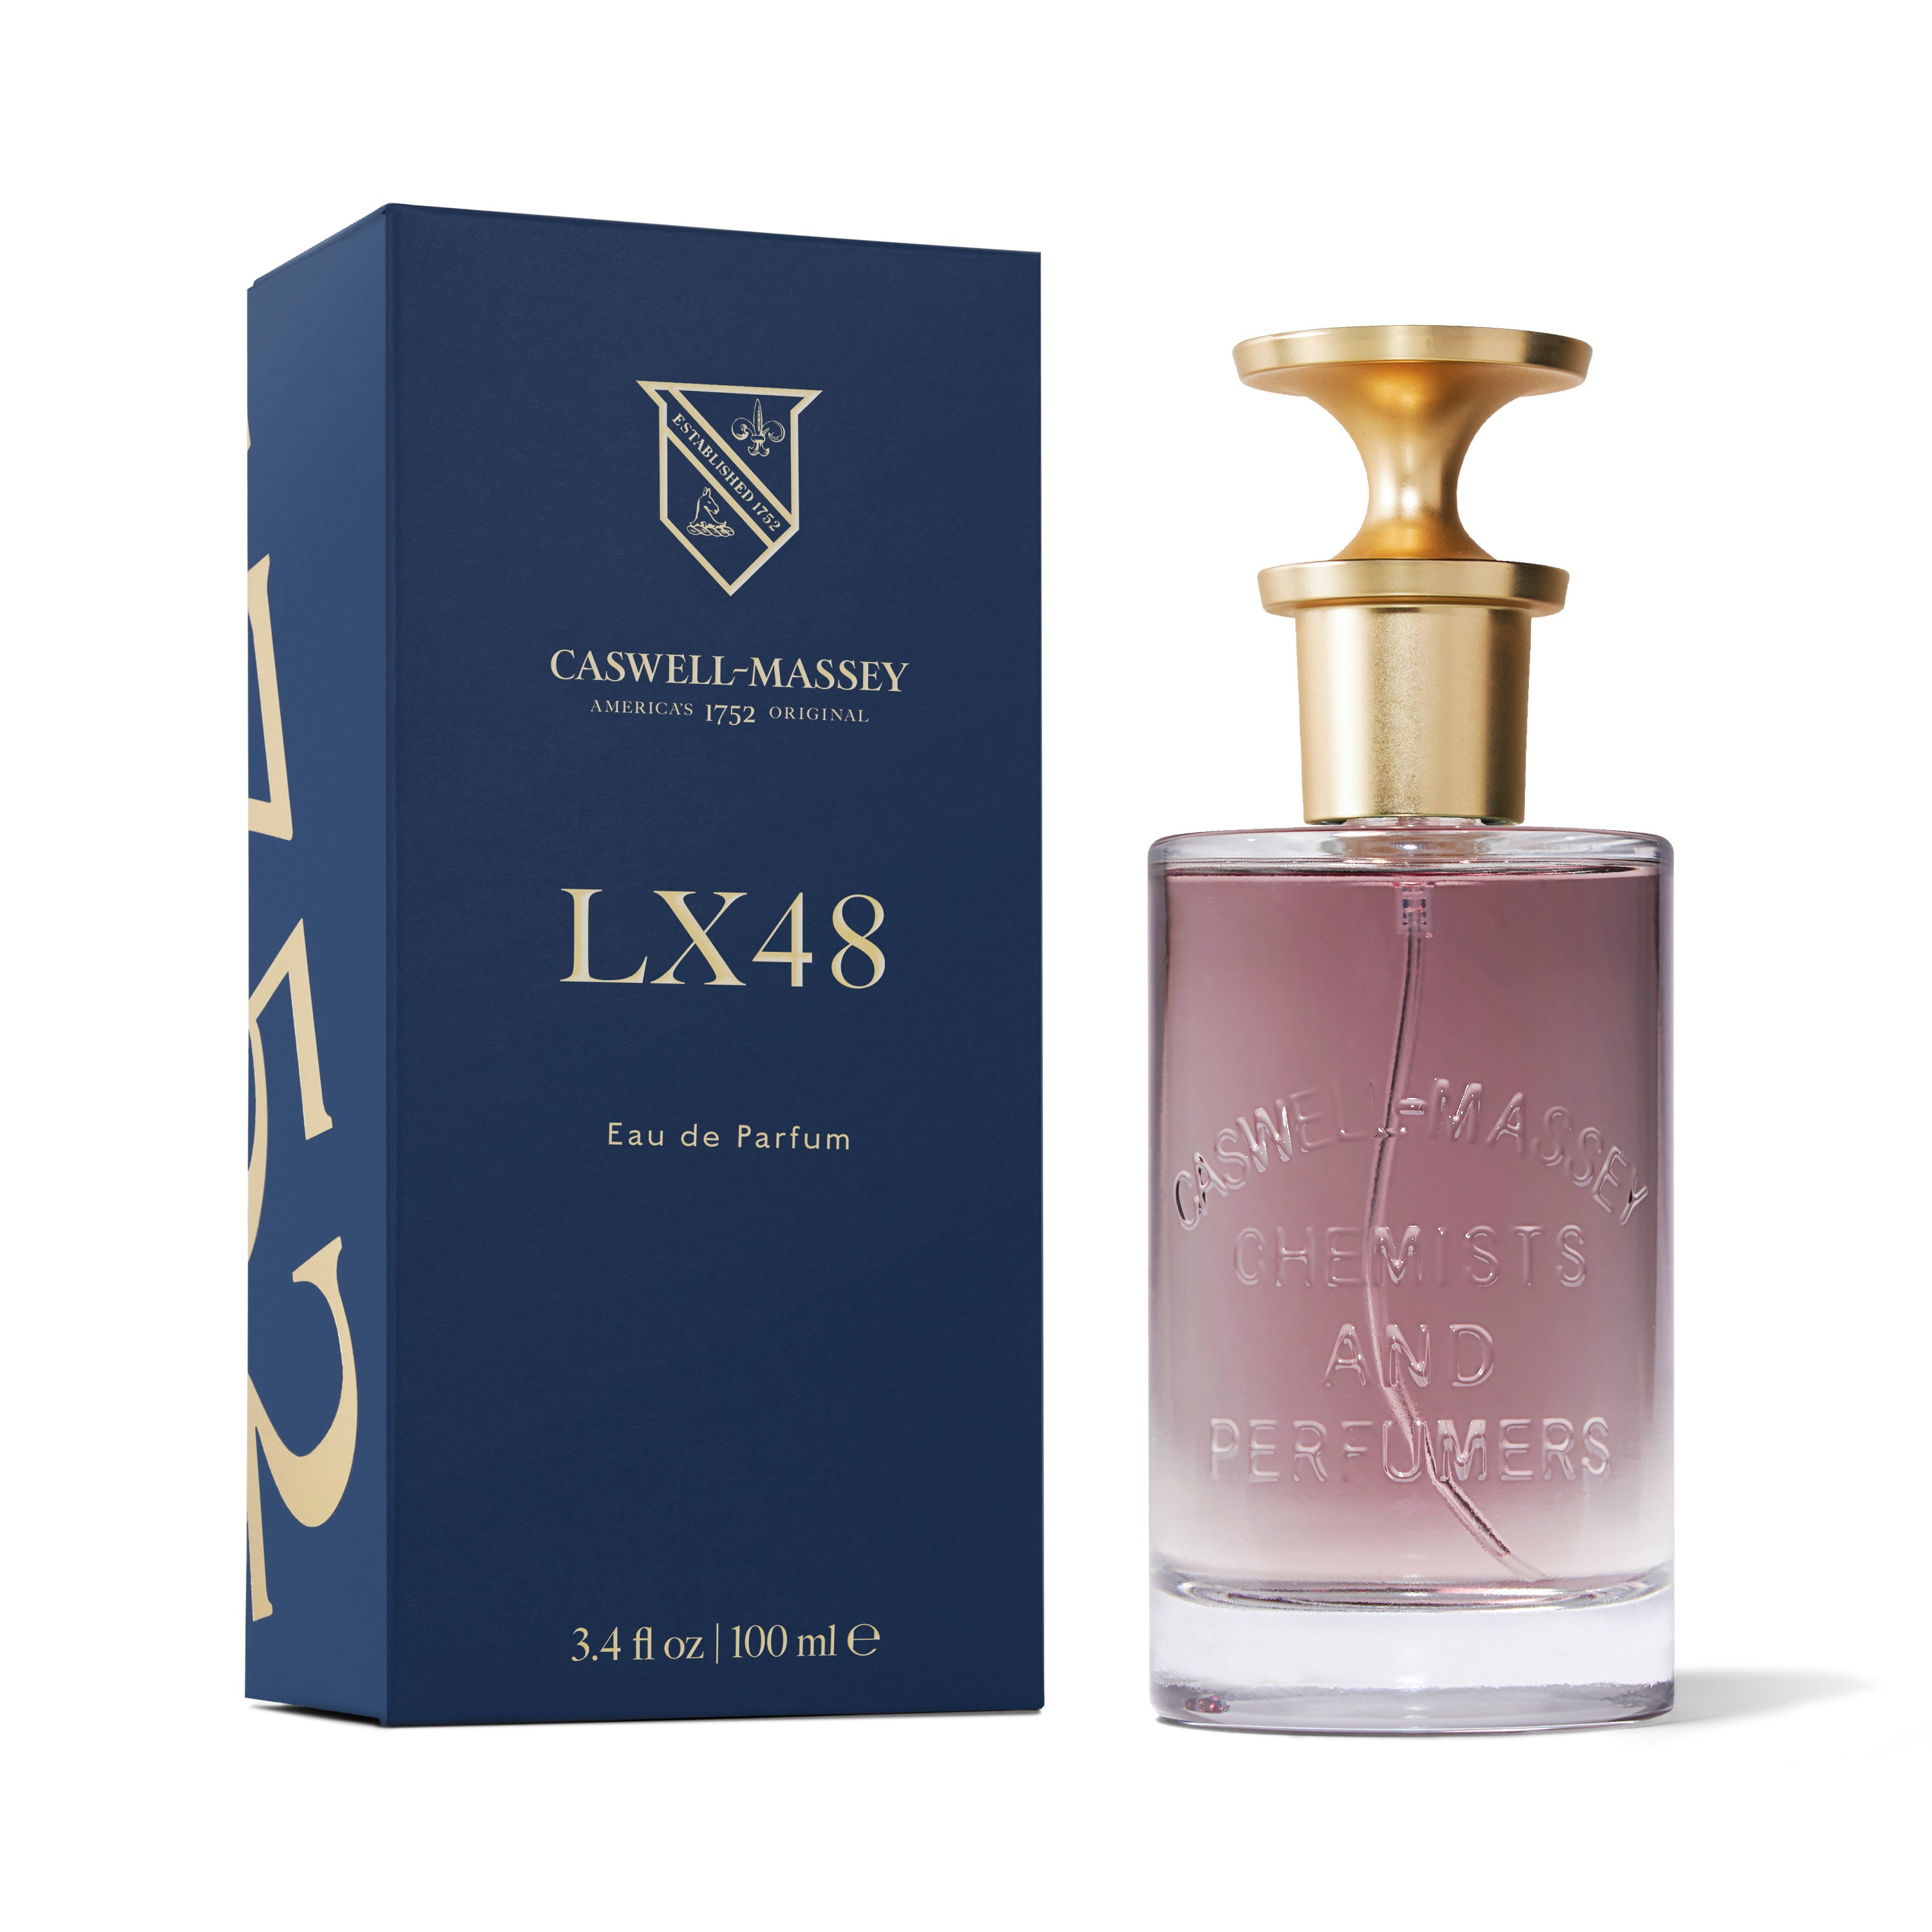 LX48 Eau de Parfum, Fine Fragrance by Caswell-Massey 100mL Full Size, shown with navy blue box